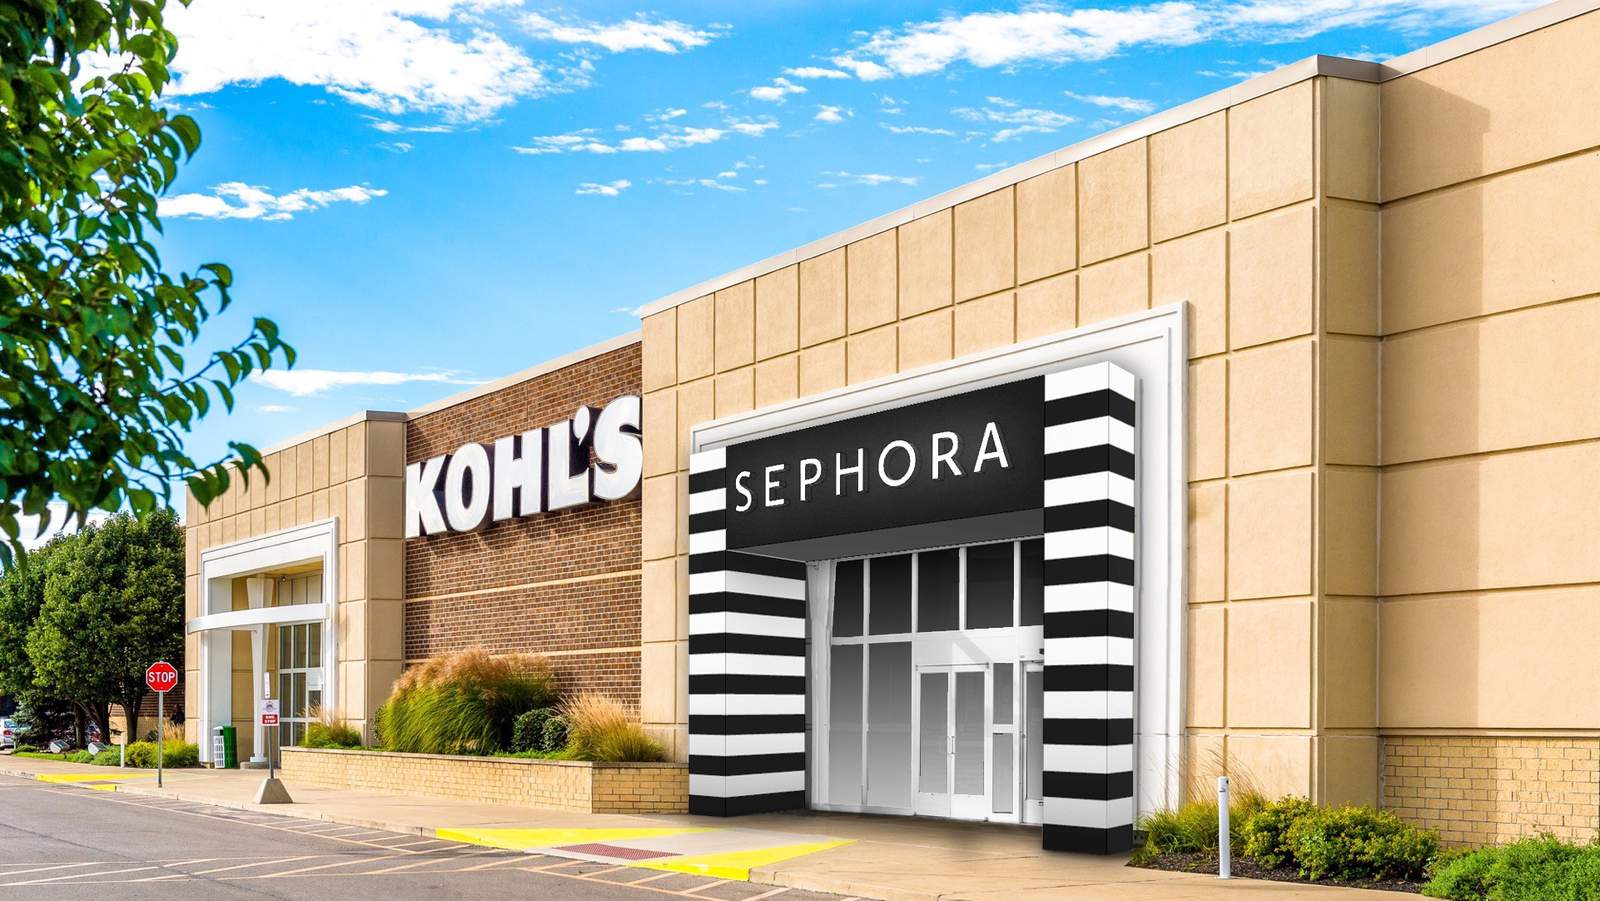 Sephora to take over cosmetics in Kohl’s stores